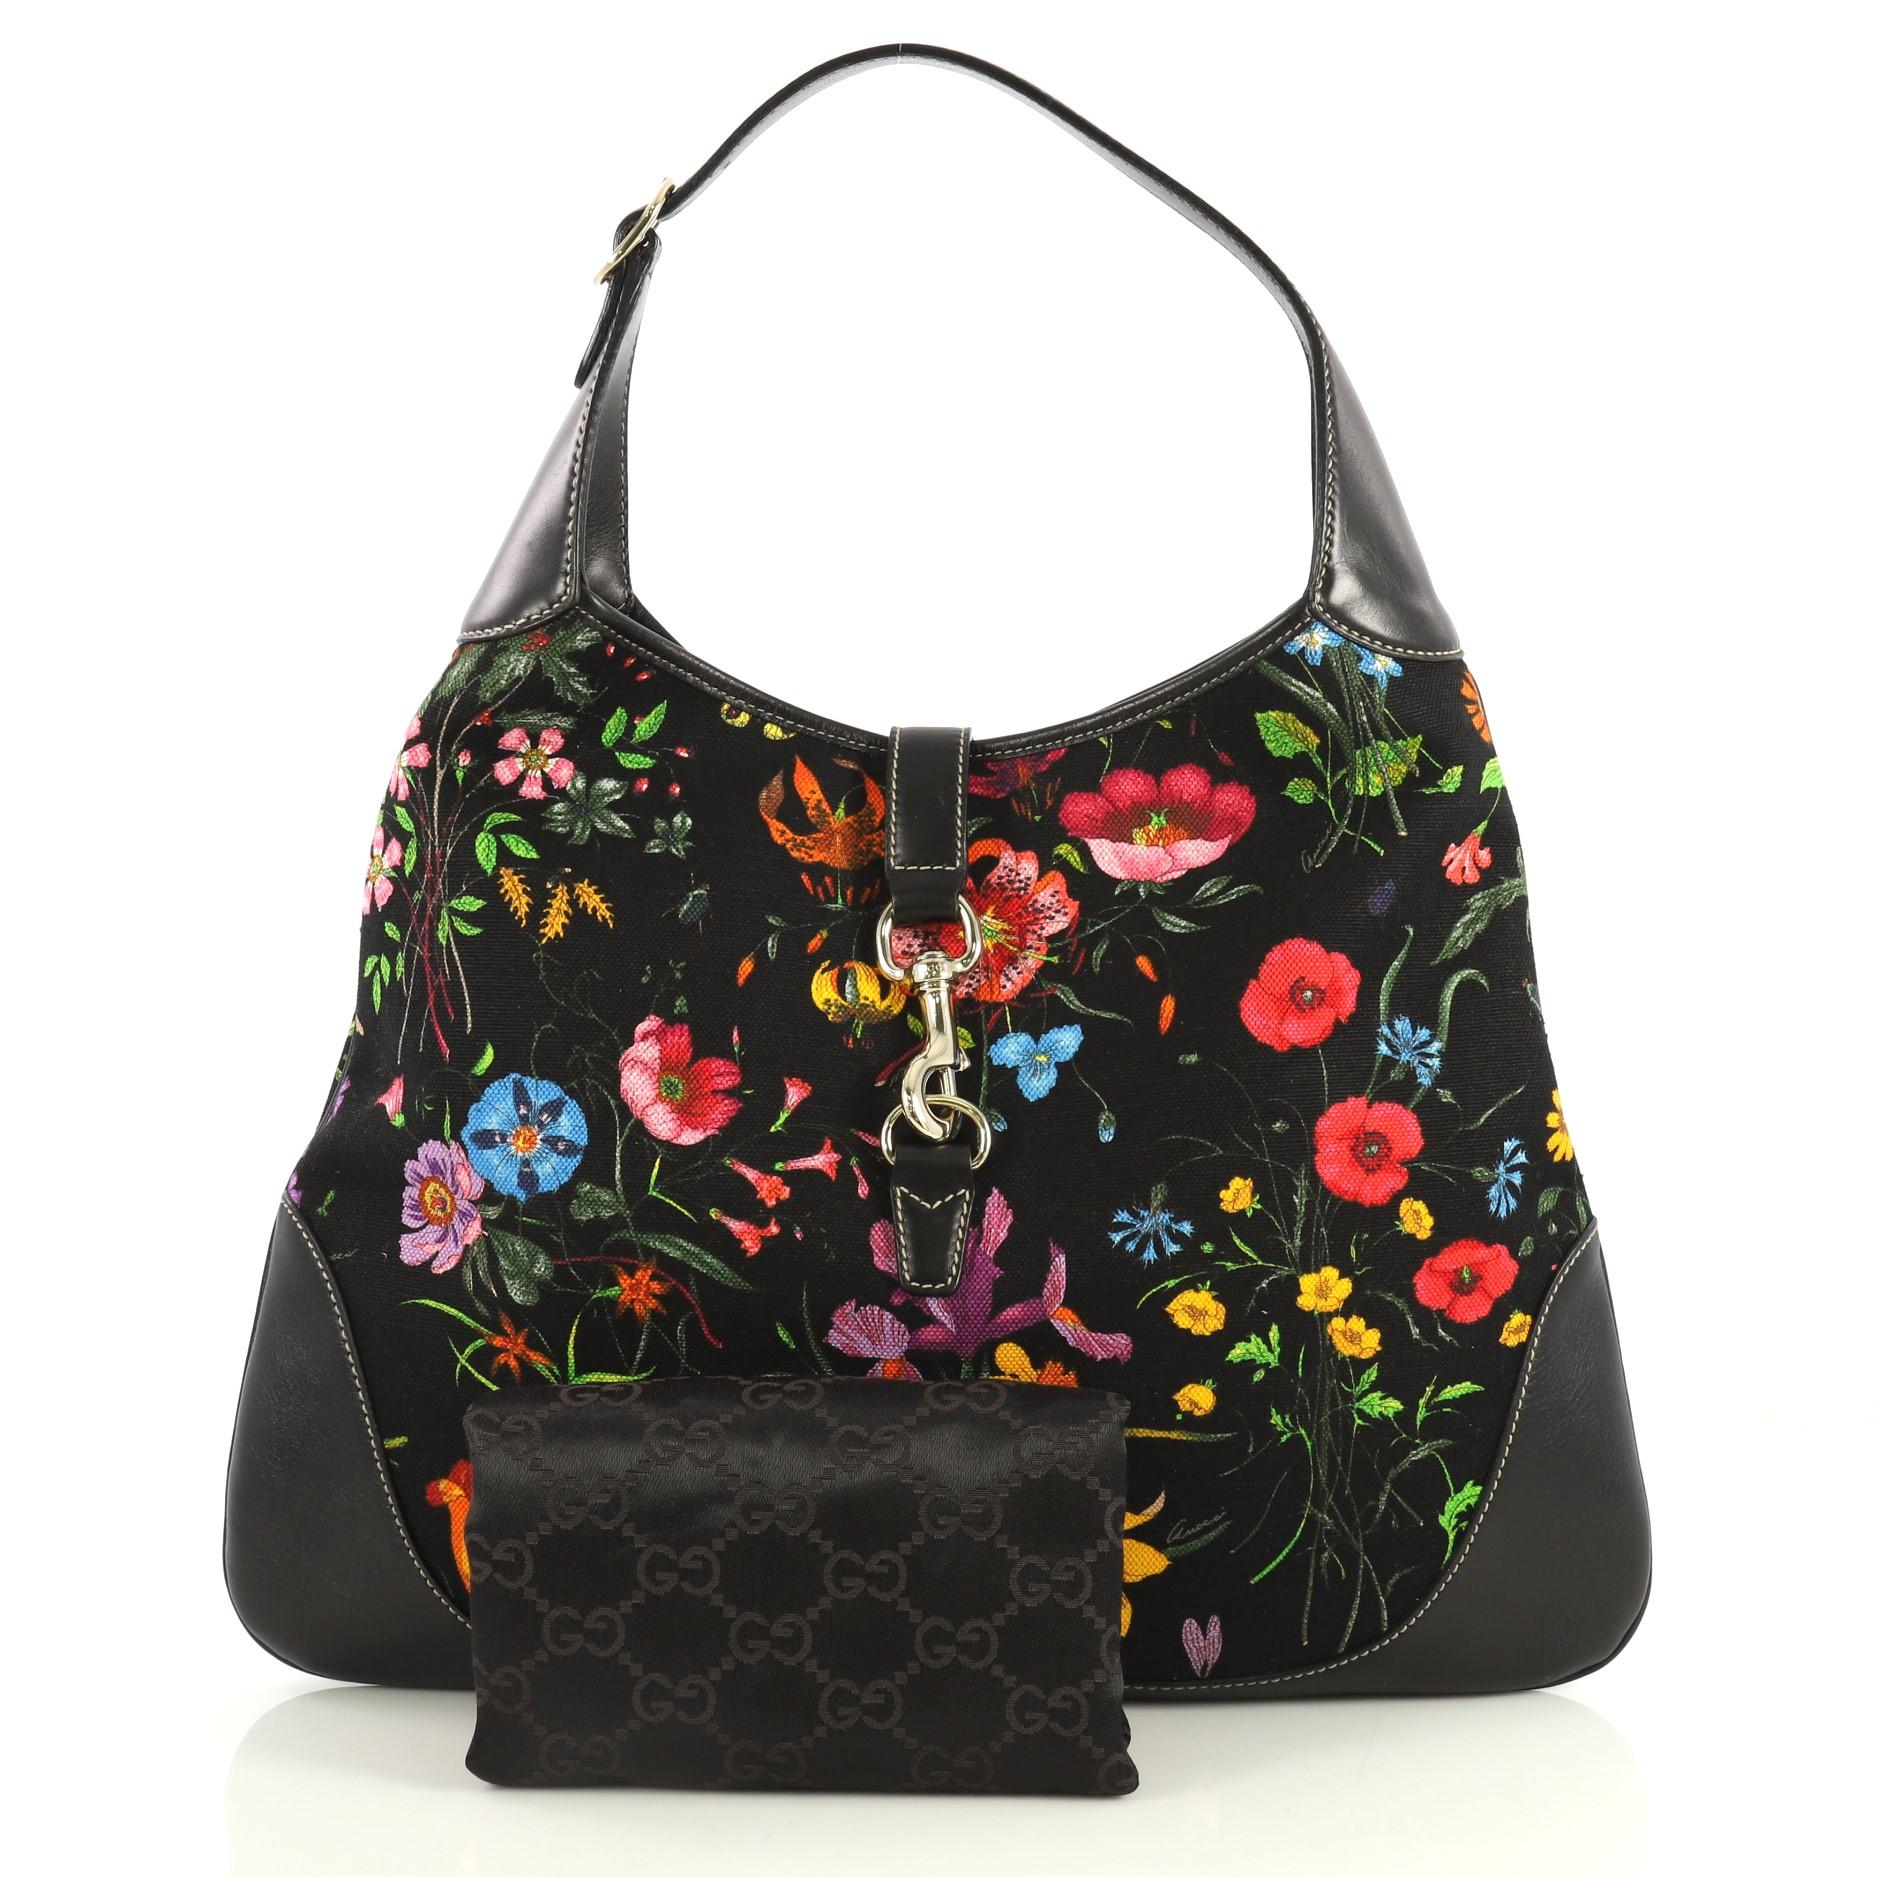 This Gucci Jackie O Bag Flora Canvas Large, crafted from black flora printed canvas, features an adjustable shoulder strap and gold-tone hardware. Its clip lock closure opens to a neutral canvas interior with side zip and slip pockets. 

Estimated